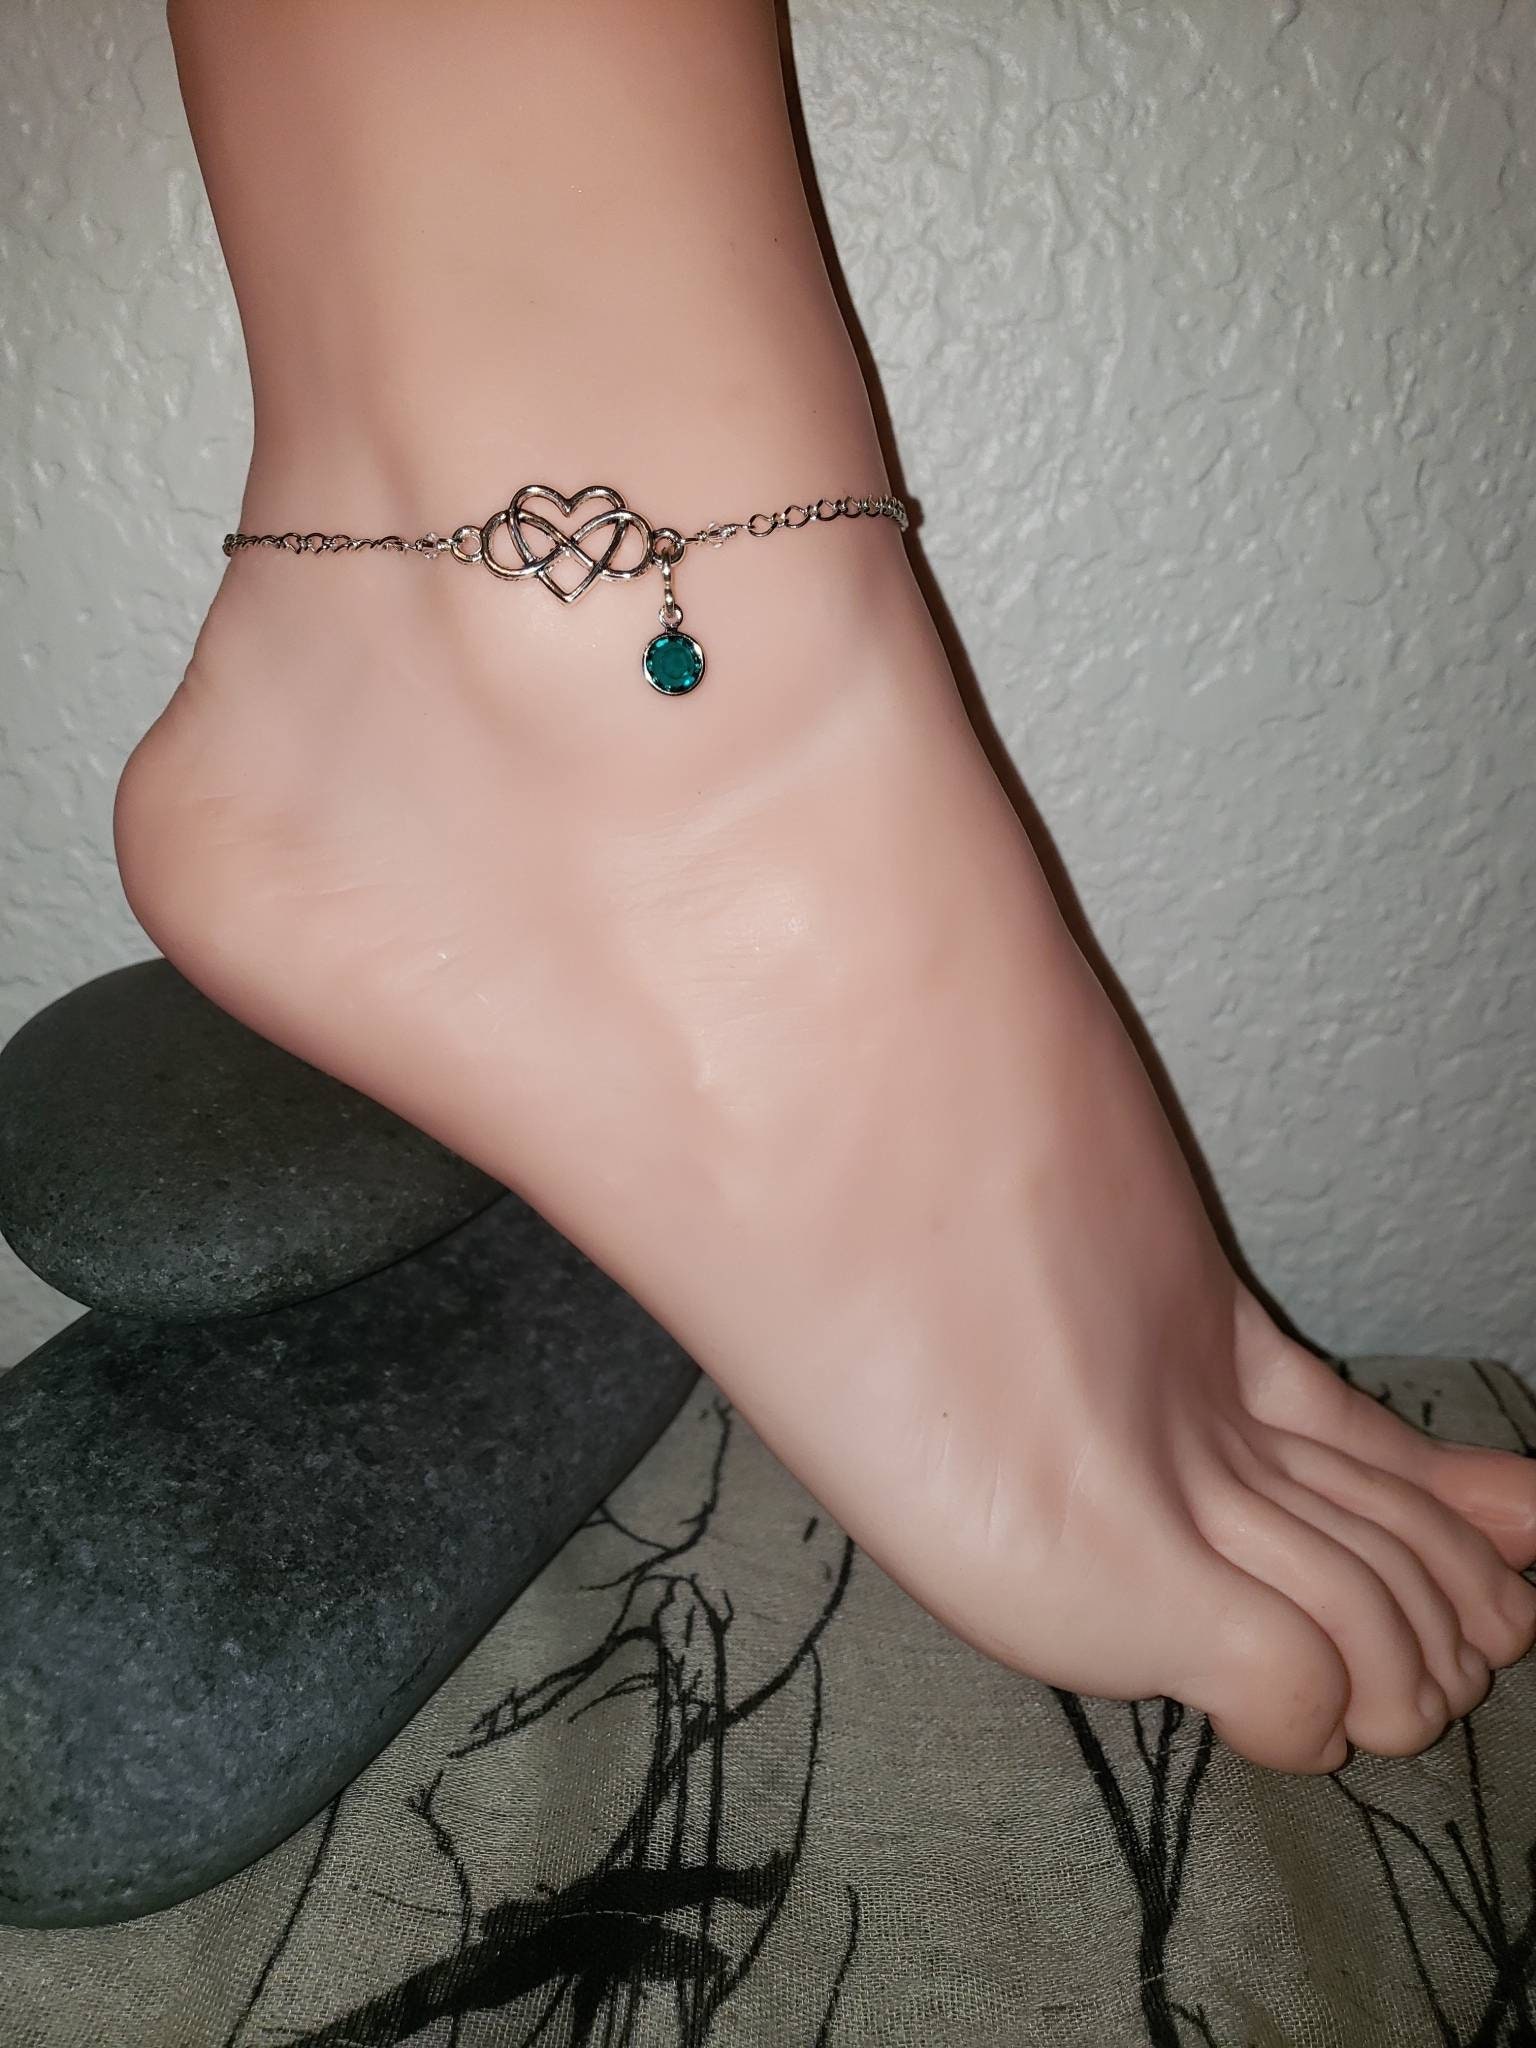 meaning of ankle chain swinger Fucking Pics Hq